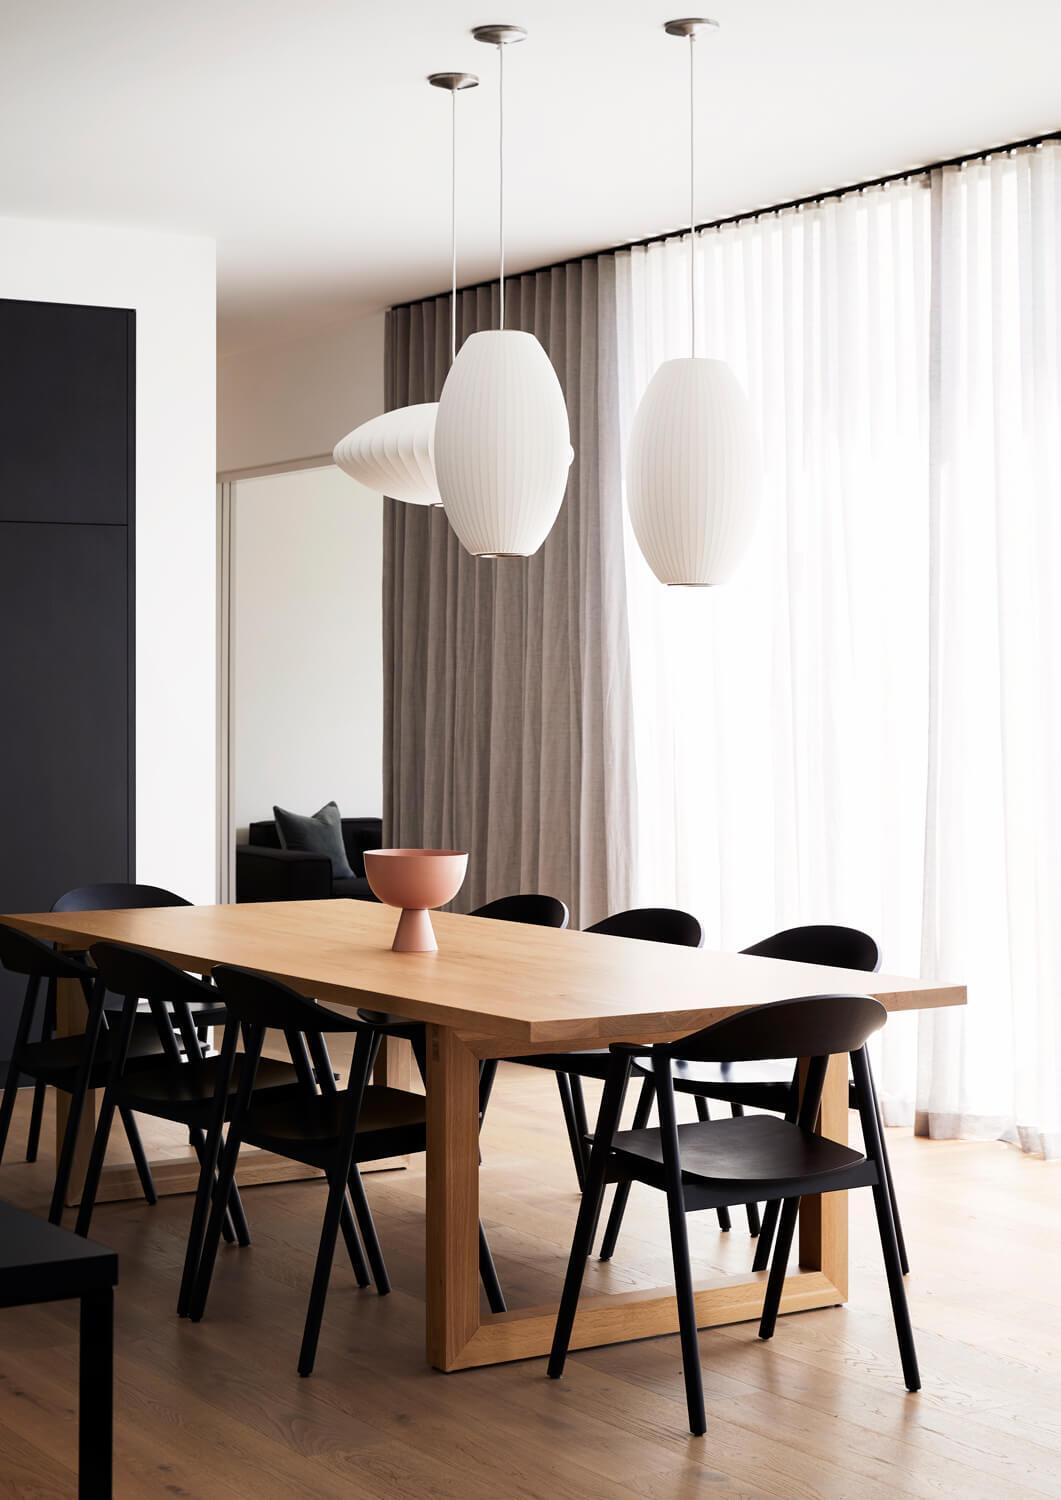 Dining Room With Contemporary Furniture And Pendant Lighting